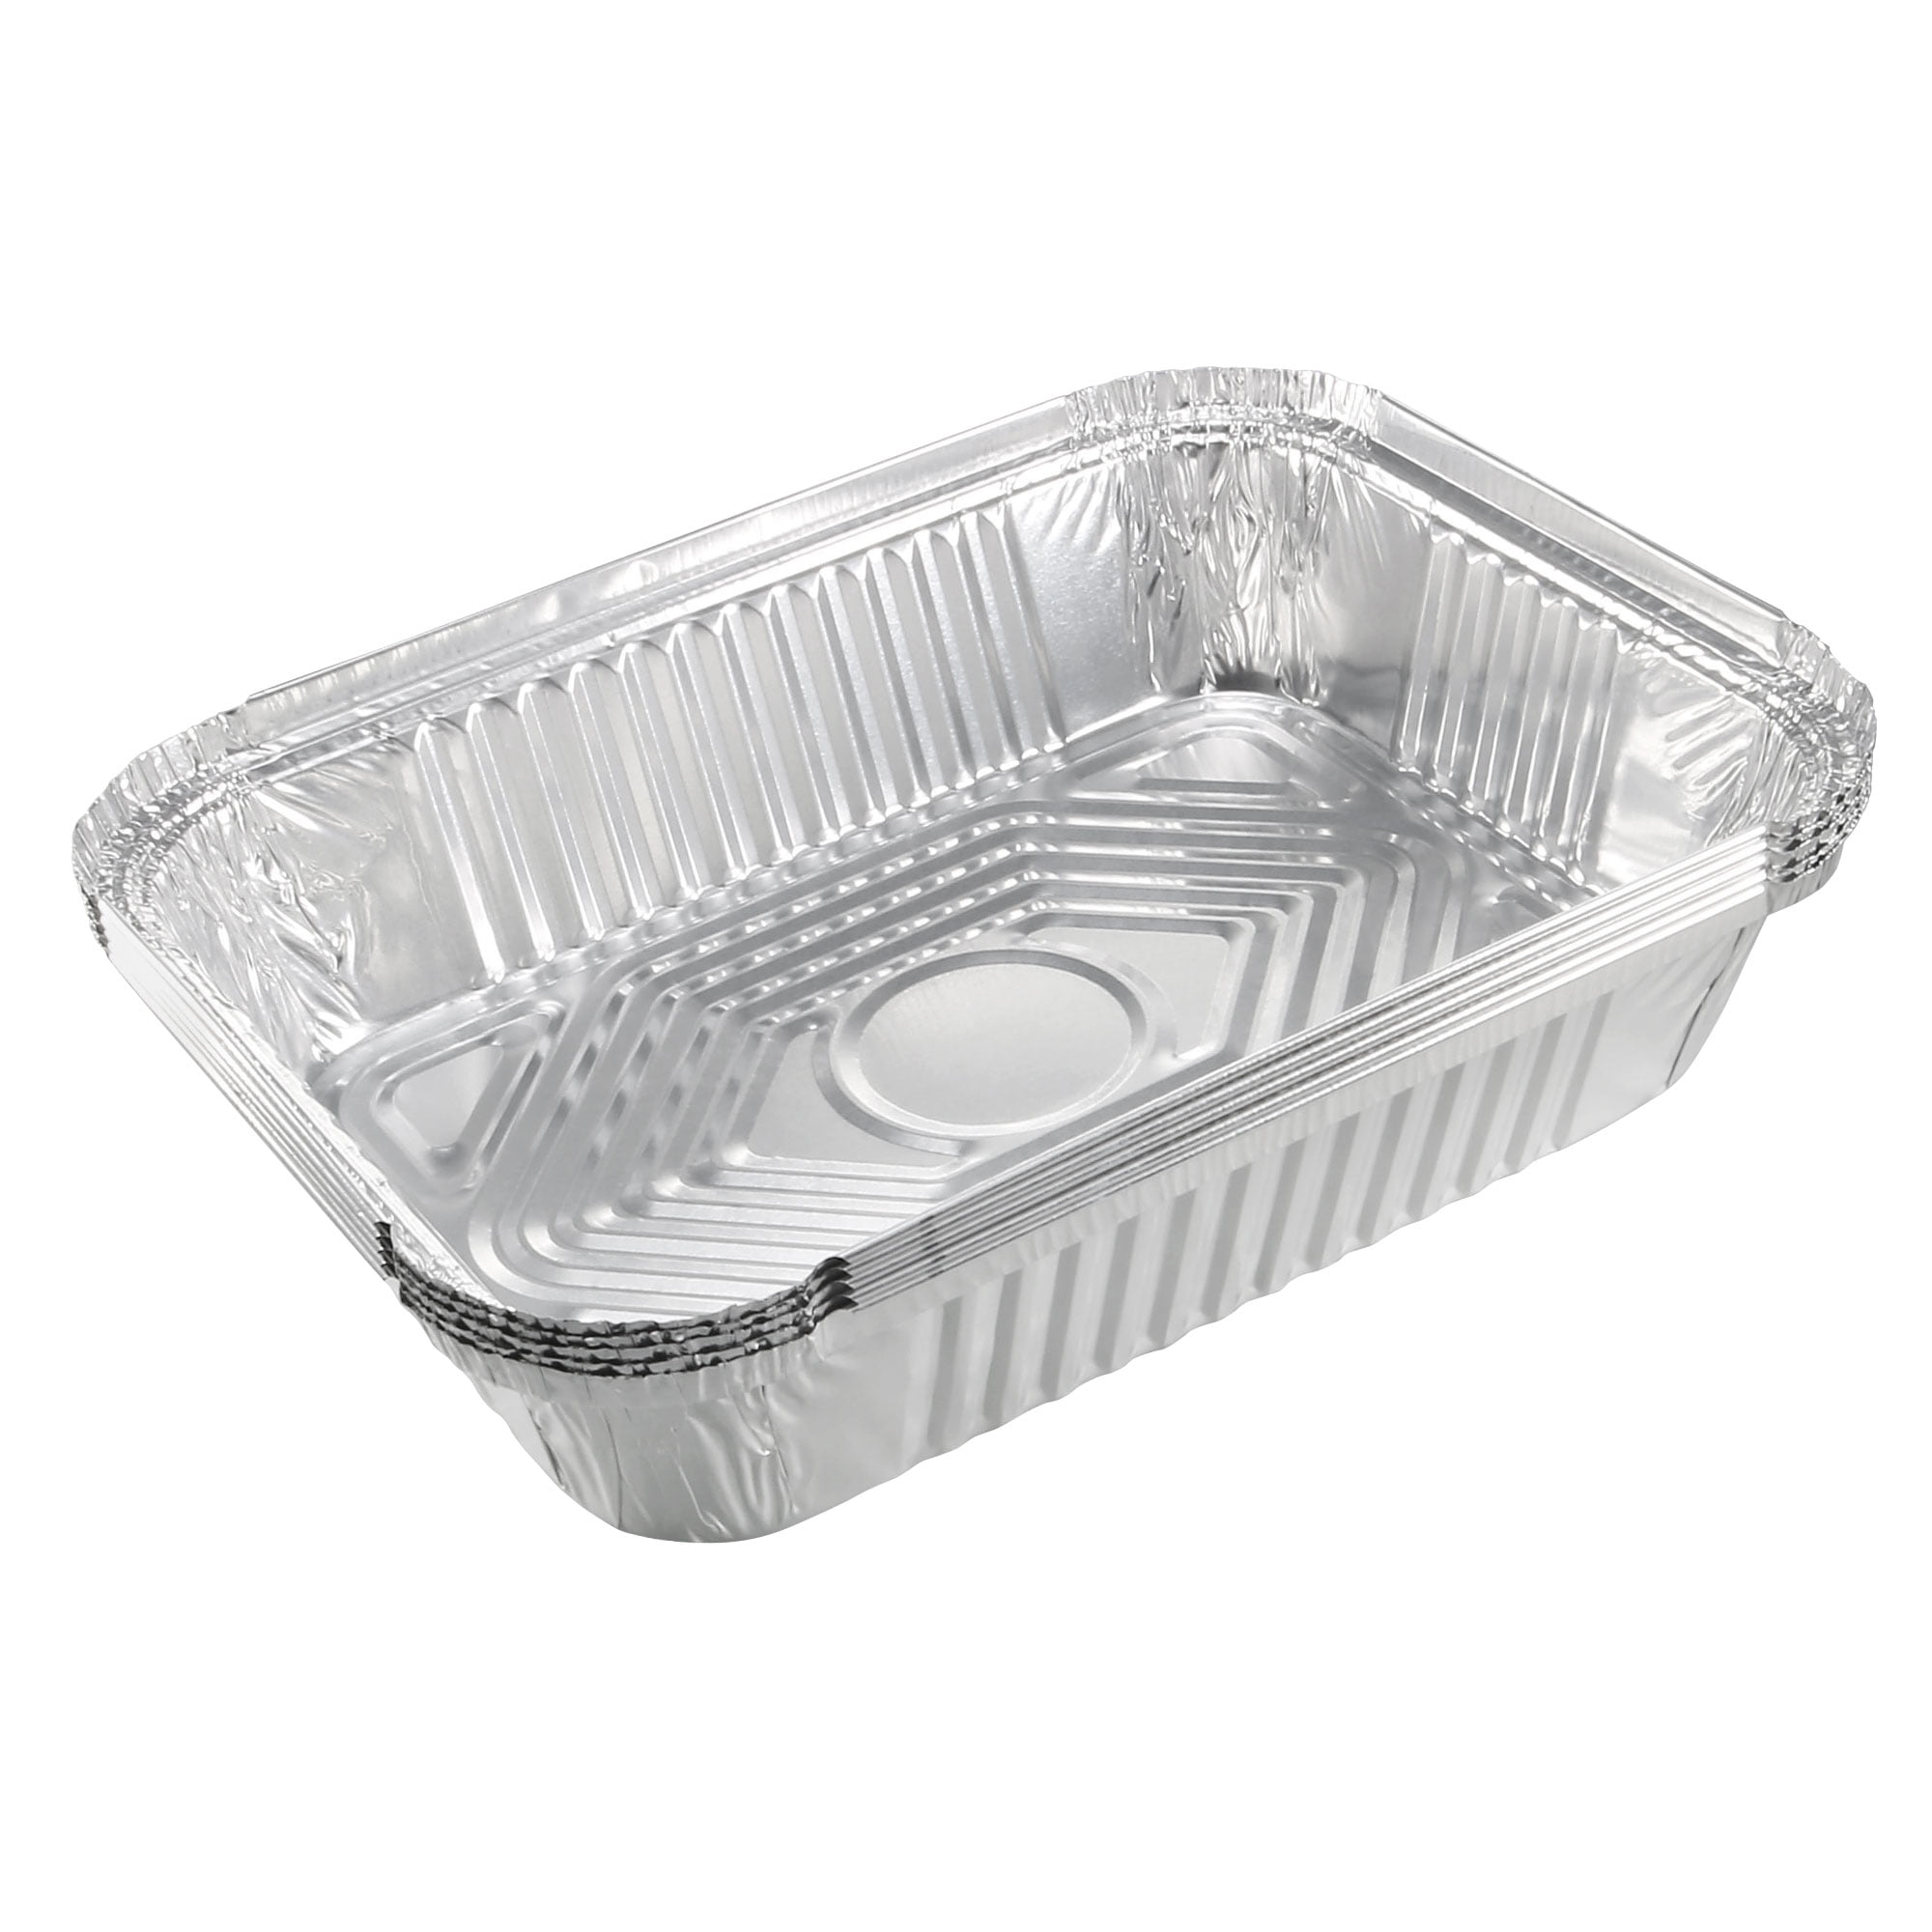 Uxcell 10 x 7.5 Aluminum Foil Pans, 59oz Disposable Trays Containers 48  Pack